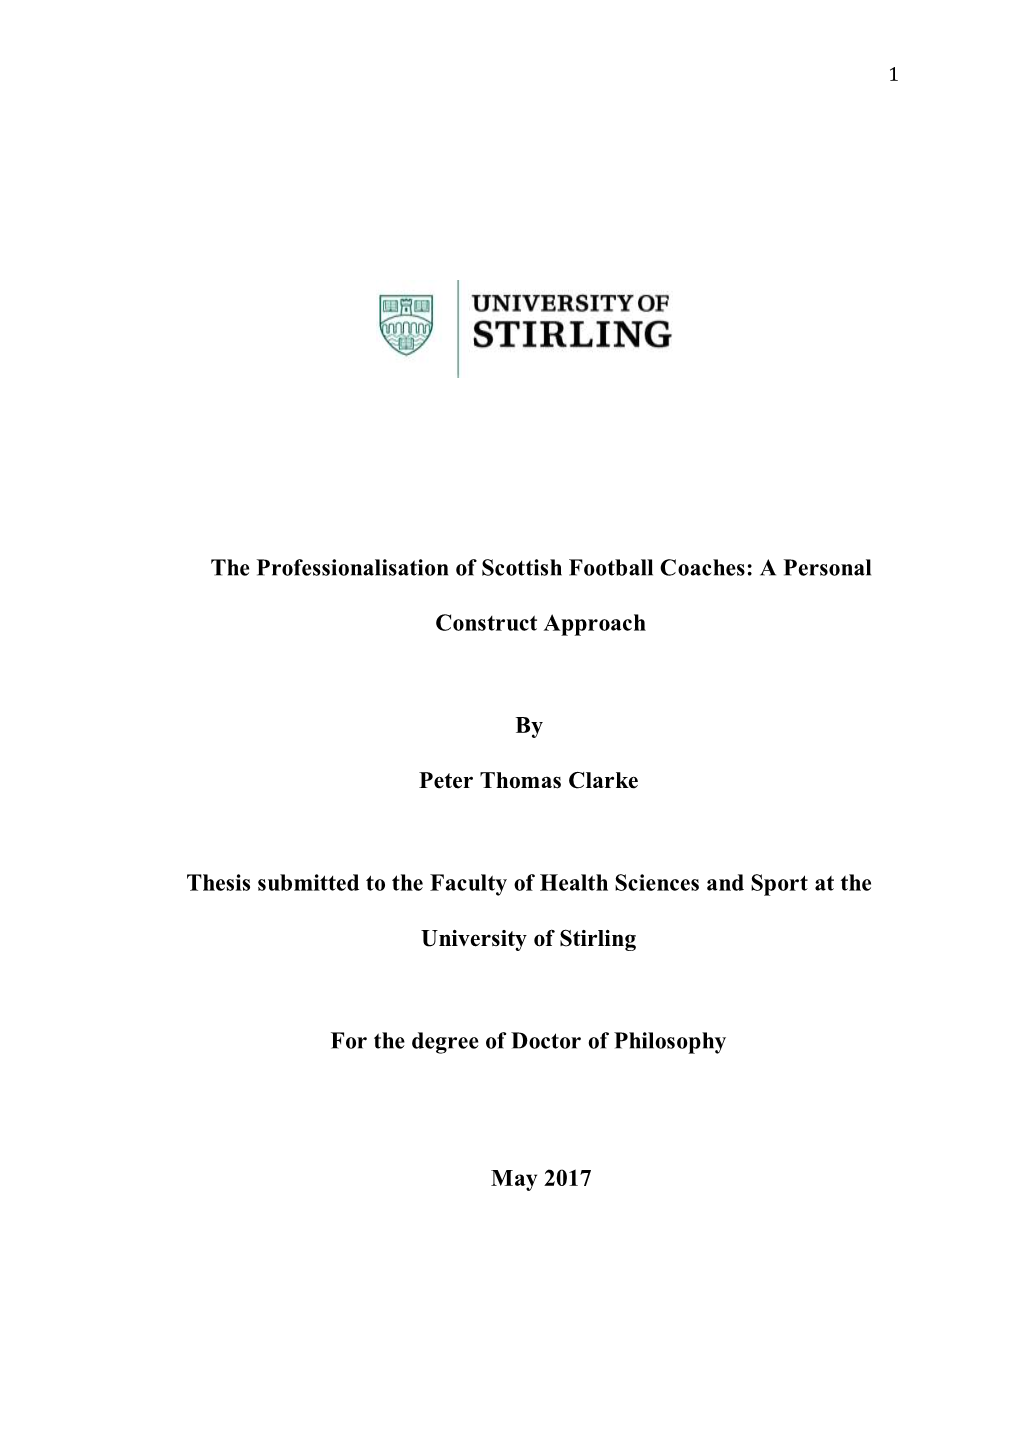 The Professionalisation of Scottish Football Coaches: a Personal Construct Approach by Peter Thomas Clarke Thesis Submitted to T